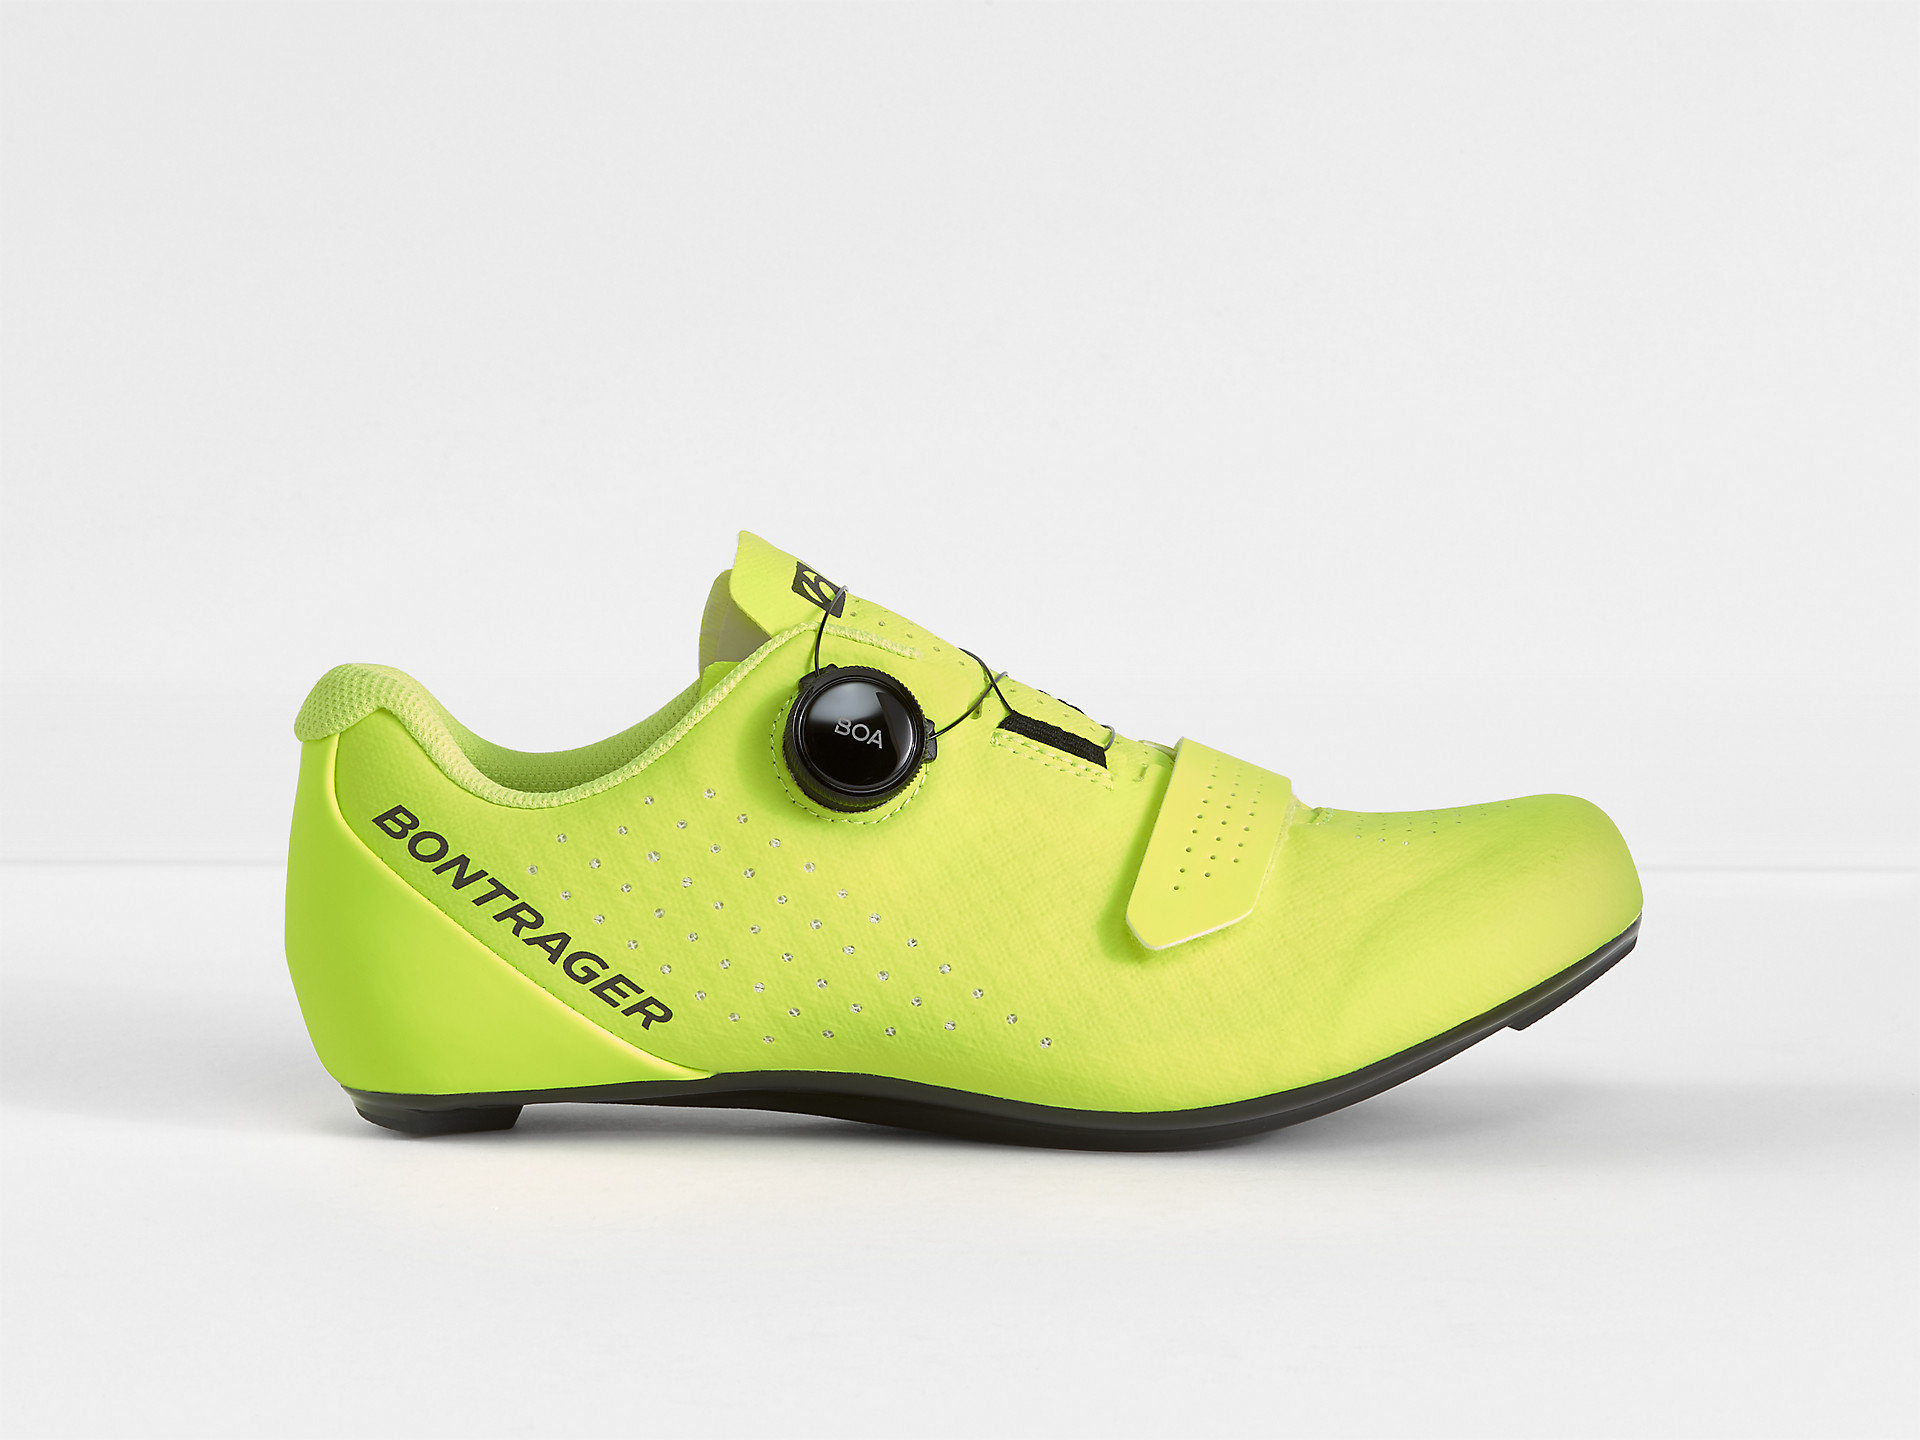 <a href="https://cycles-clement.be/product/chaussure-bont-circuit-race-44-yel/">CHAUSSURE BONT CIRCUIT RACE 44 YEL</a>